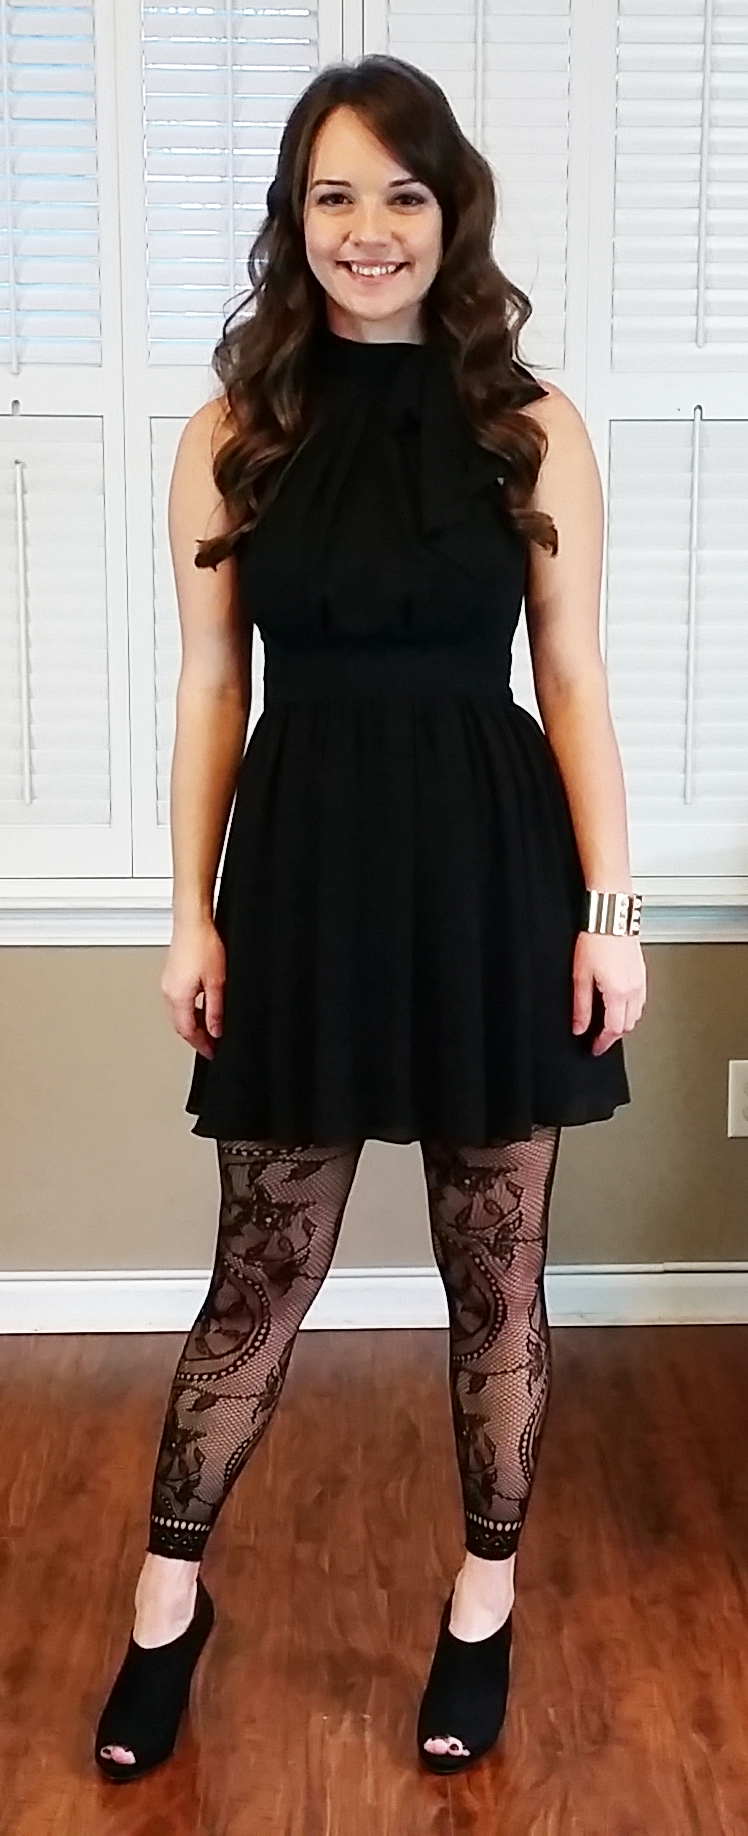 Little black dress with lace tights and booties!